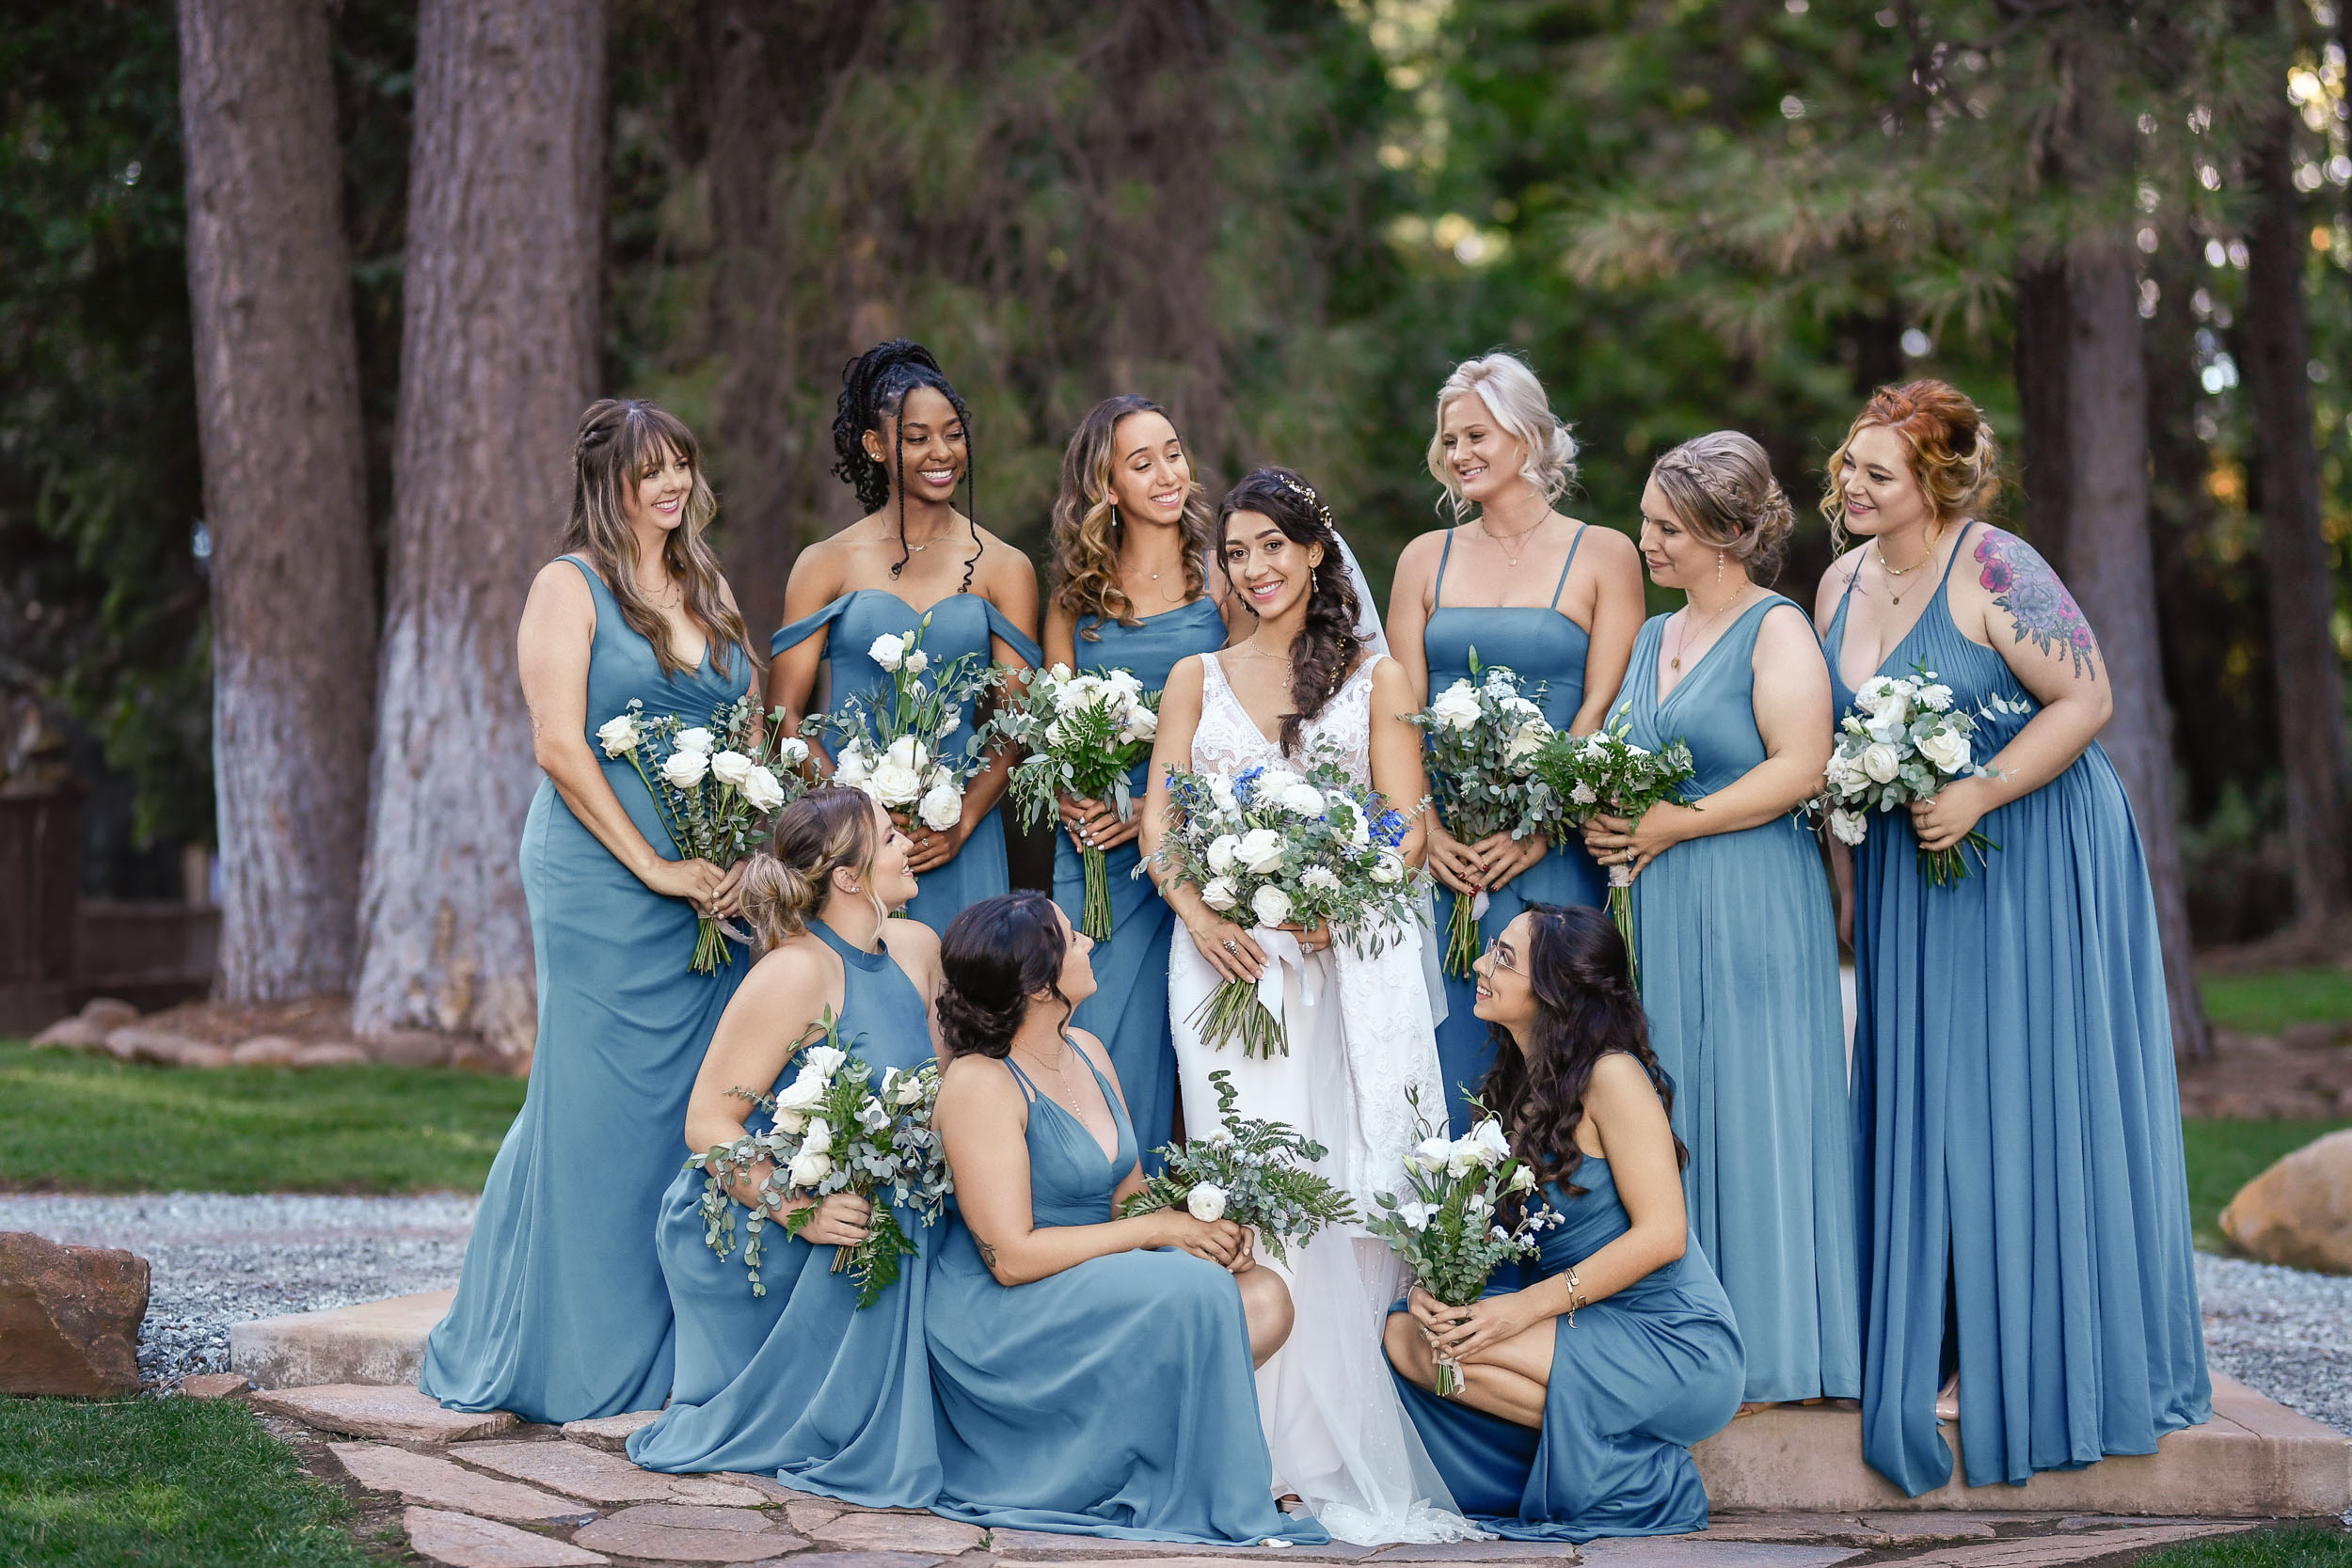 A group of bridesmaids in blue dresses pose for a photo.